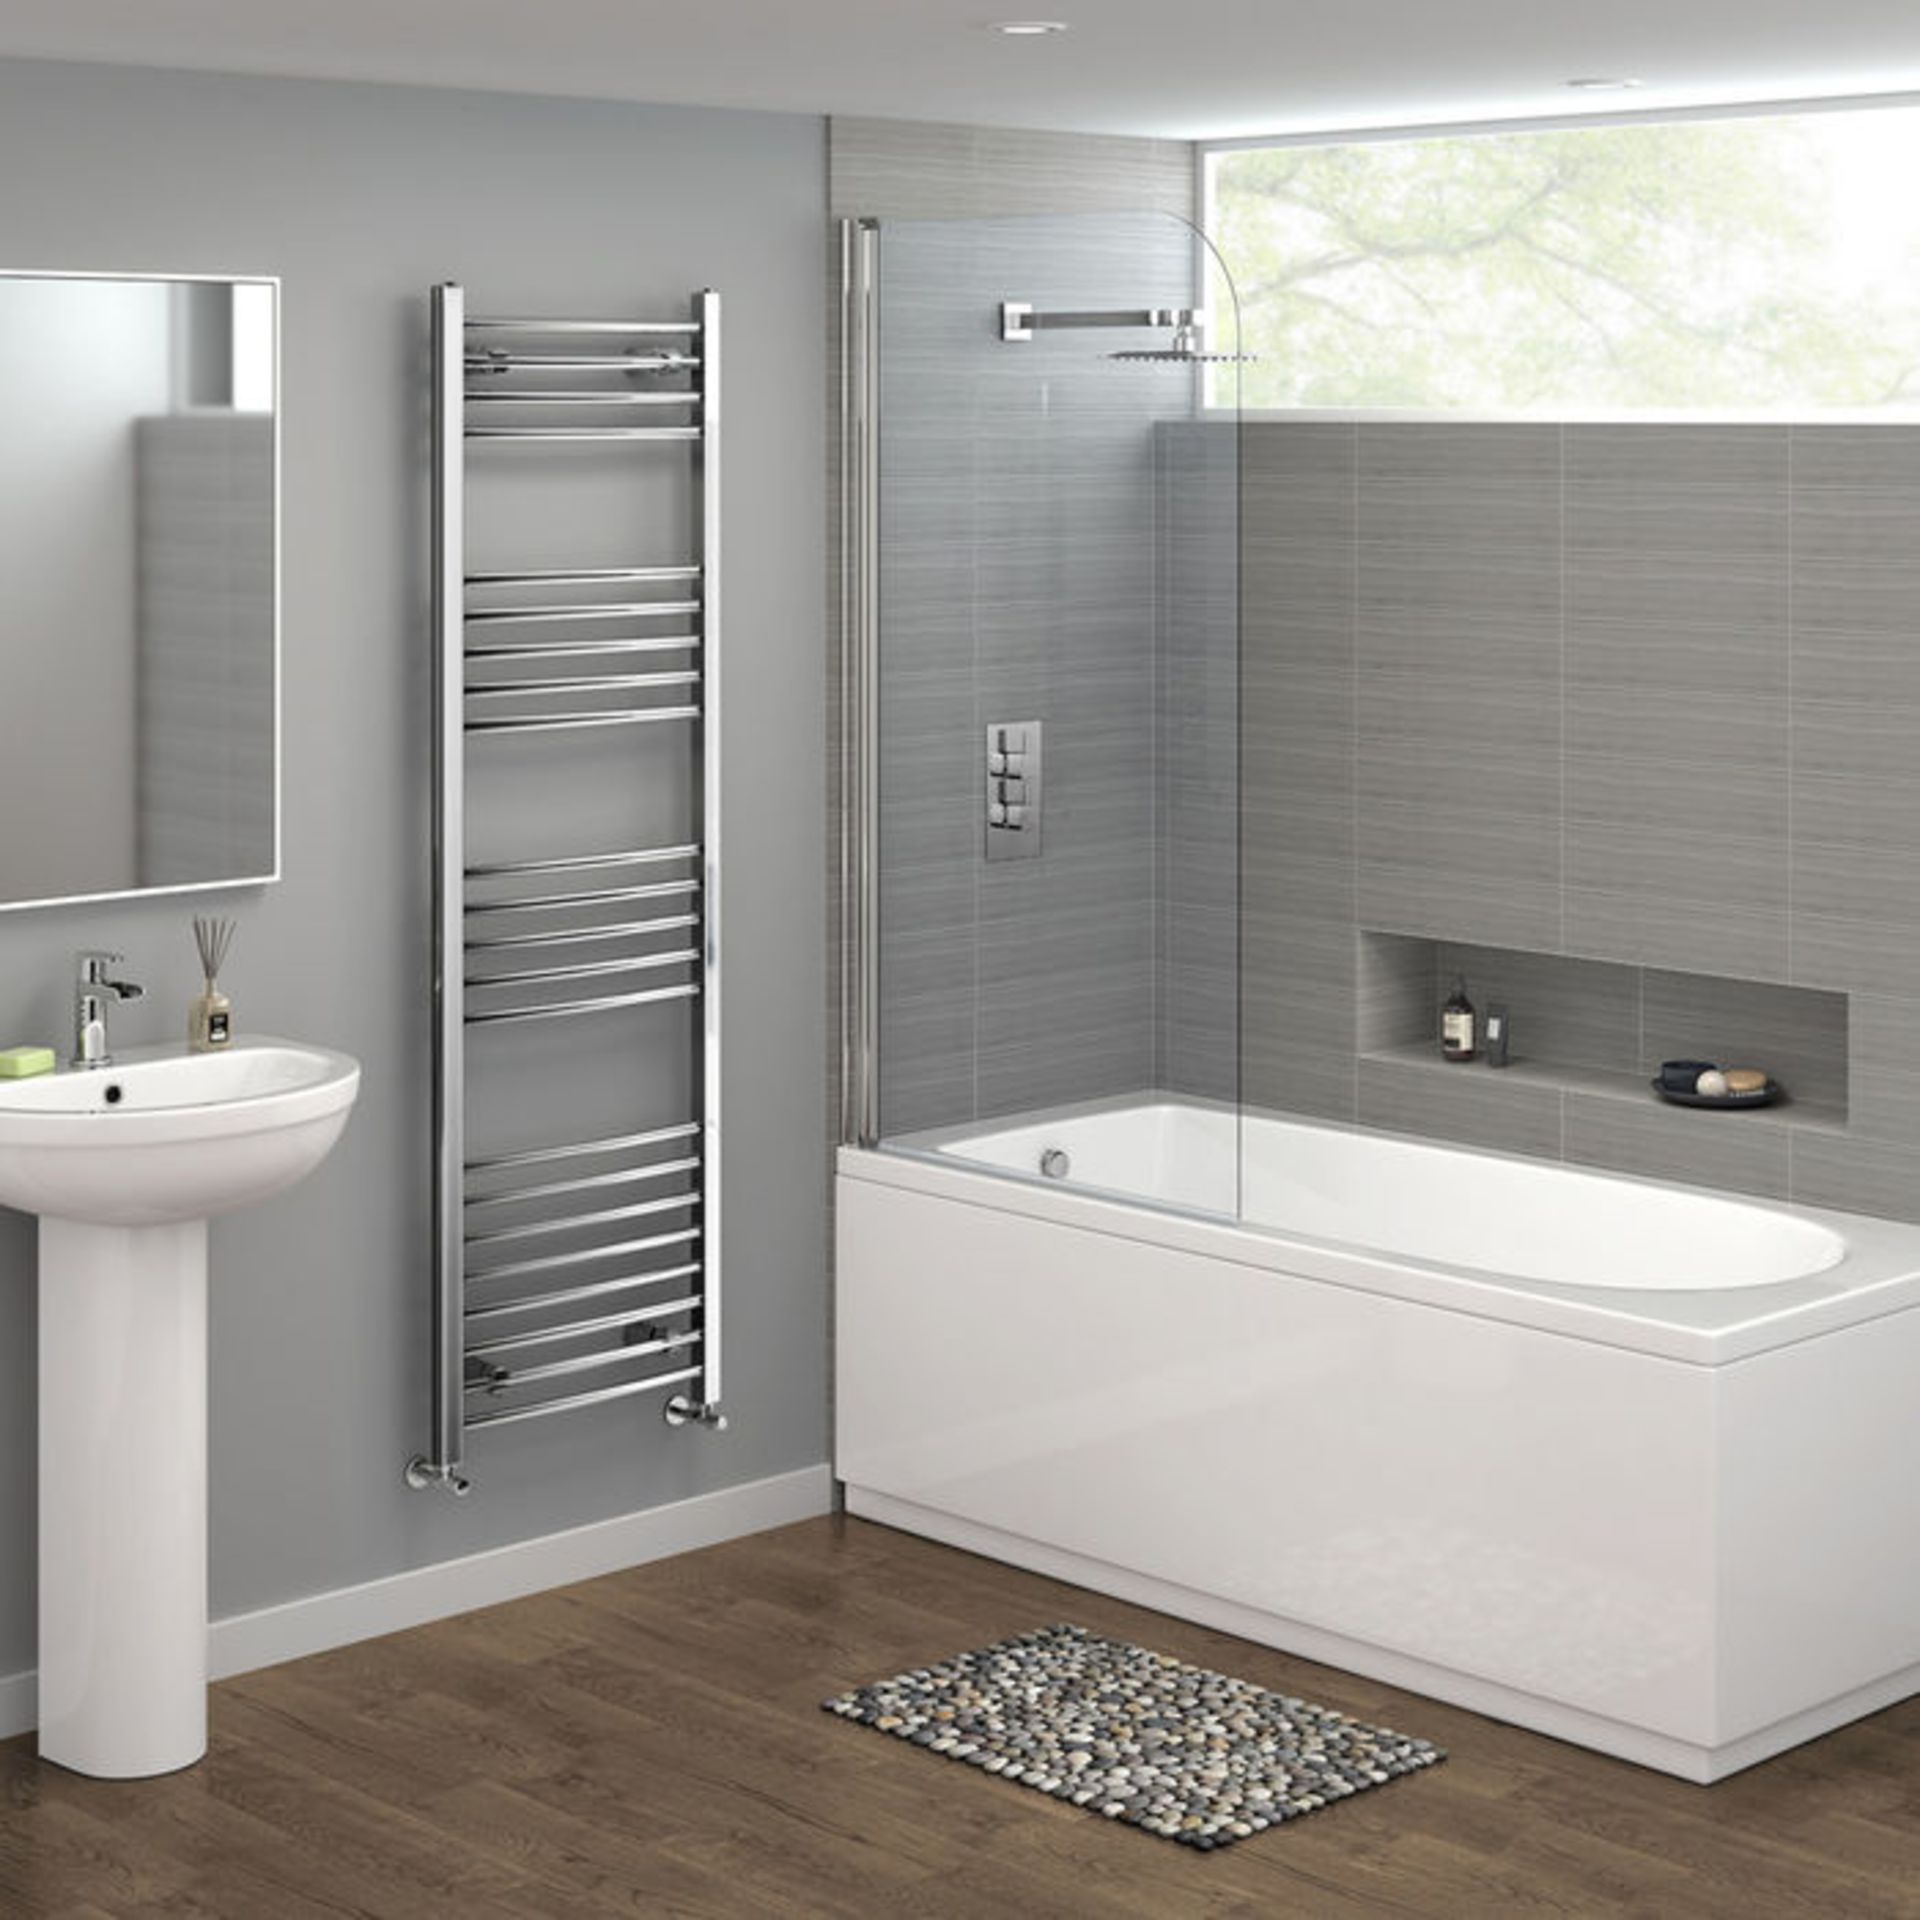 (JM49) 1600x500mm - 20mm Tubes - Chrome Curved Rail Ladder Towel Radiator. Made from chrome plated - Image 2 of 3